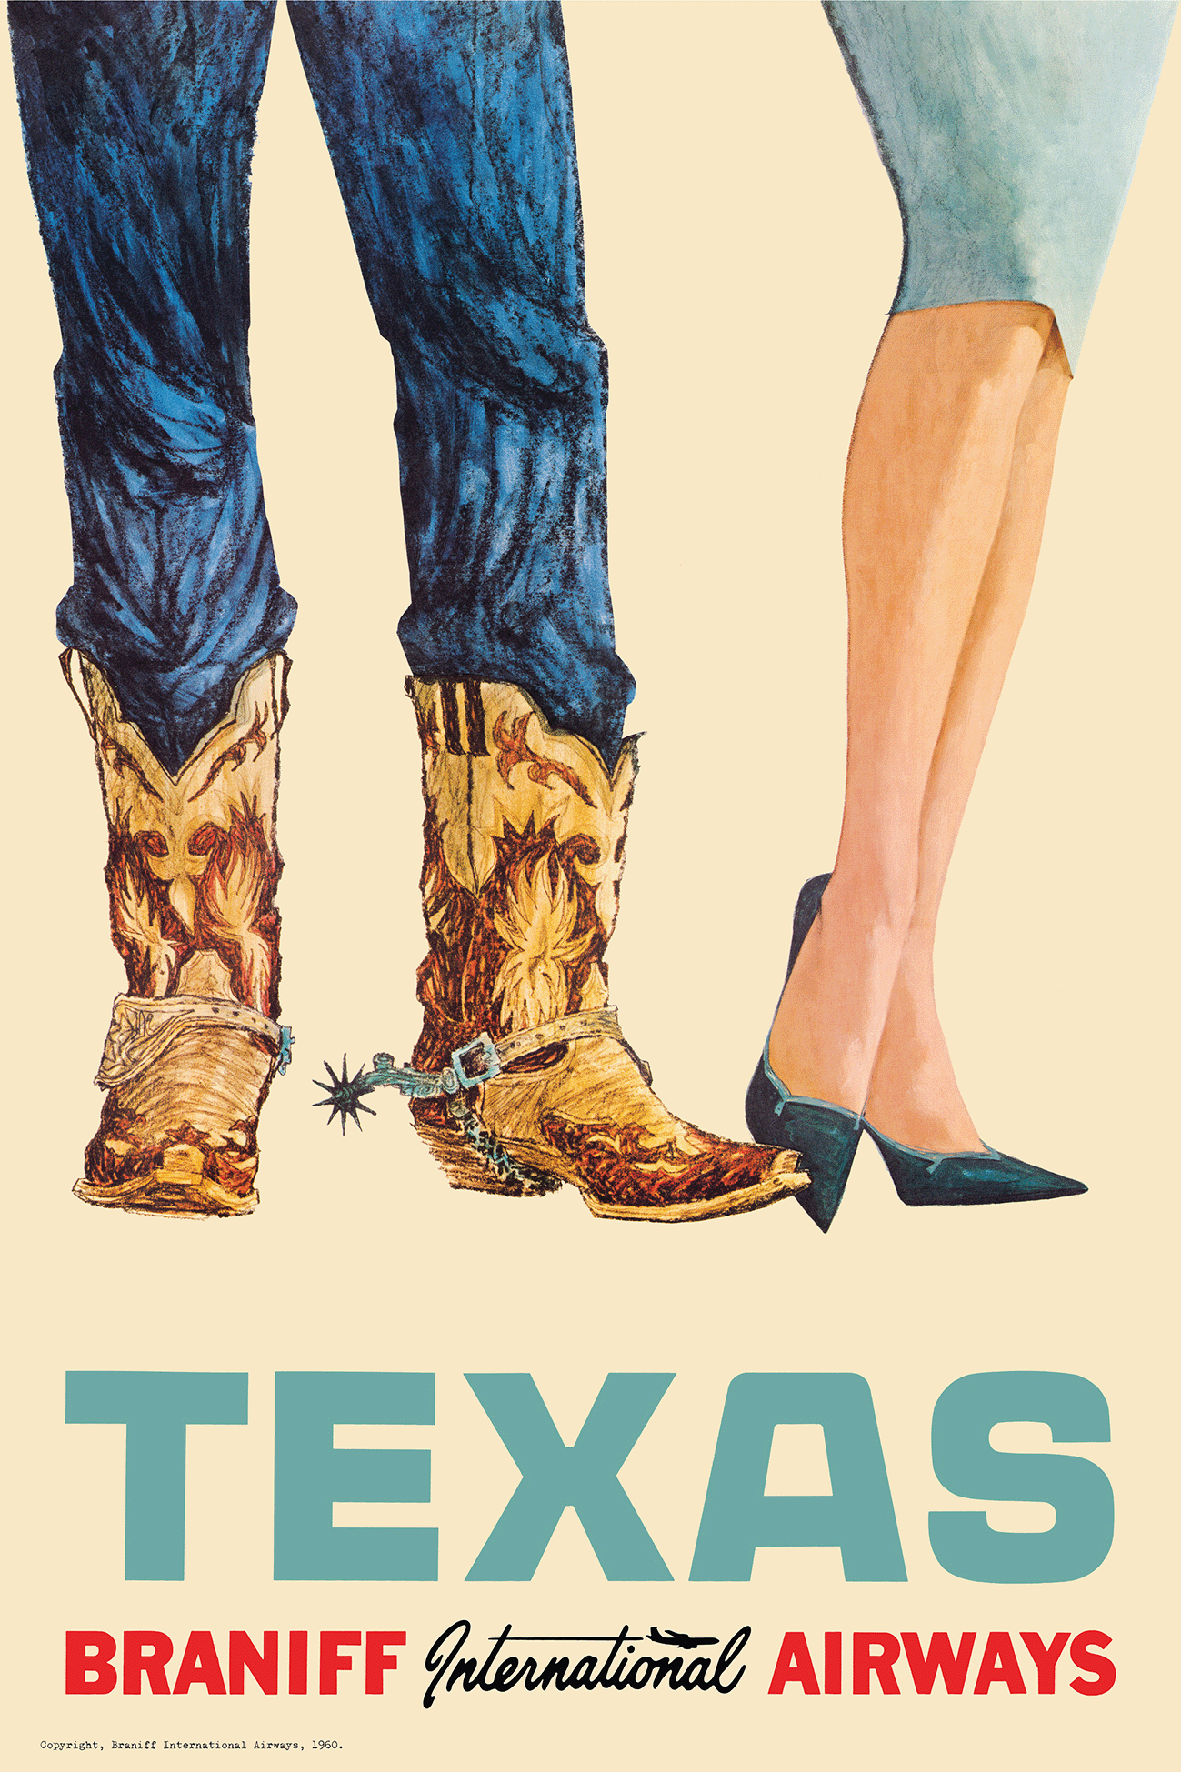 Texas, Braniff International Airways - United Air Lines, 1960s [Cow boots].